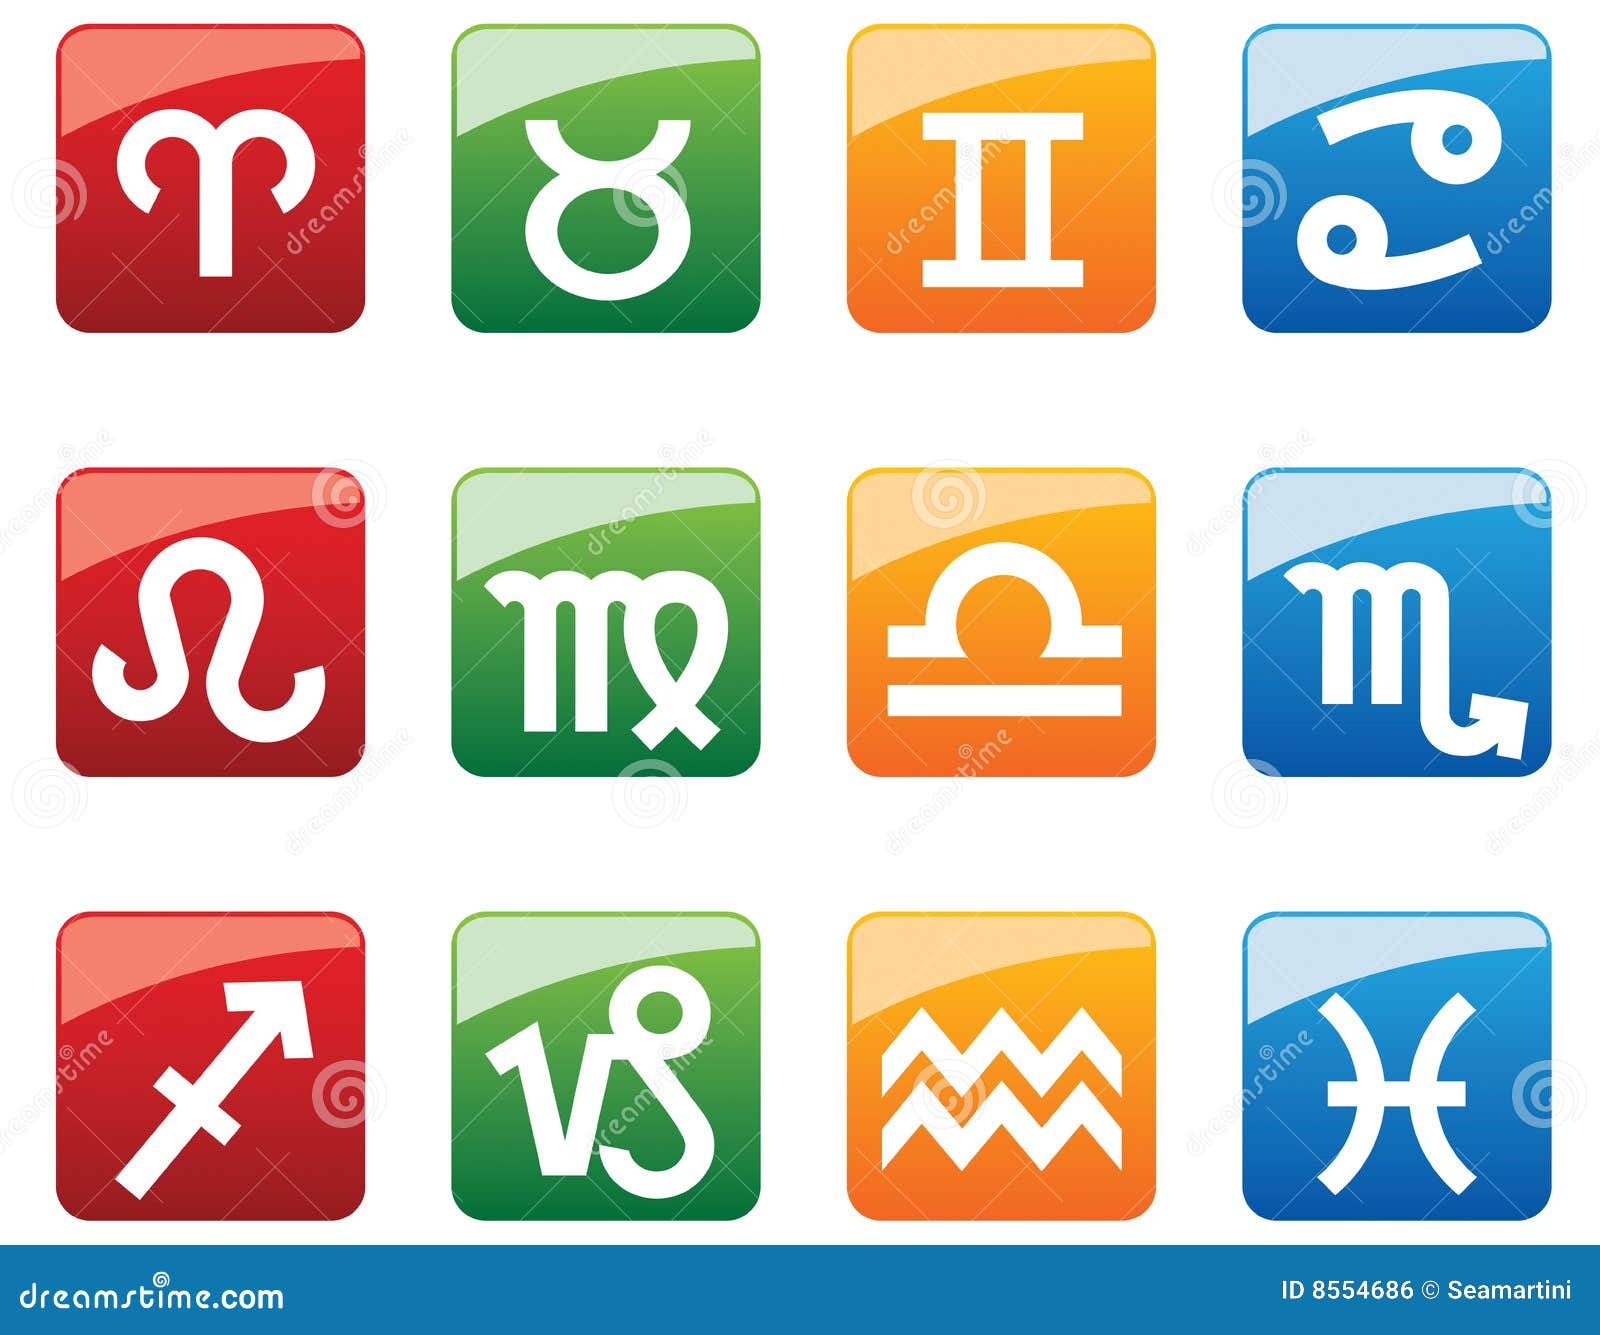 Glossy Buttons with Horoscope Symbols Stock Vector - Illustration of ...